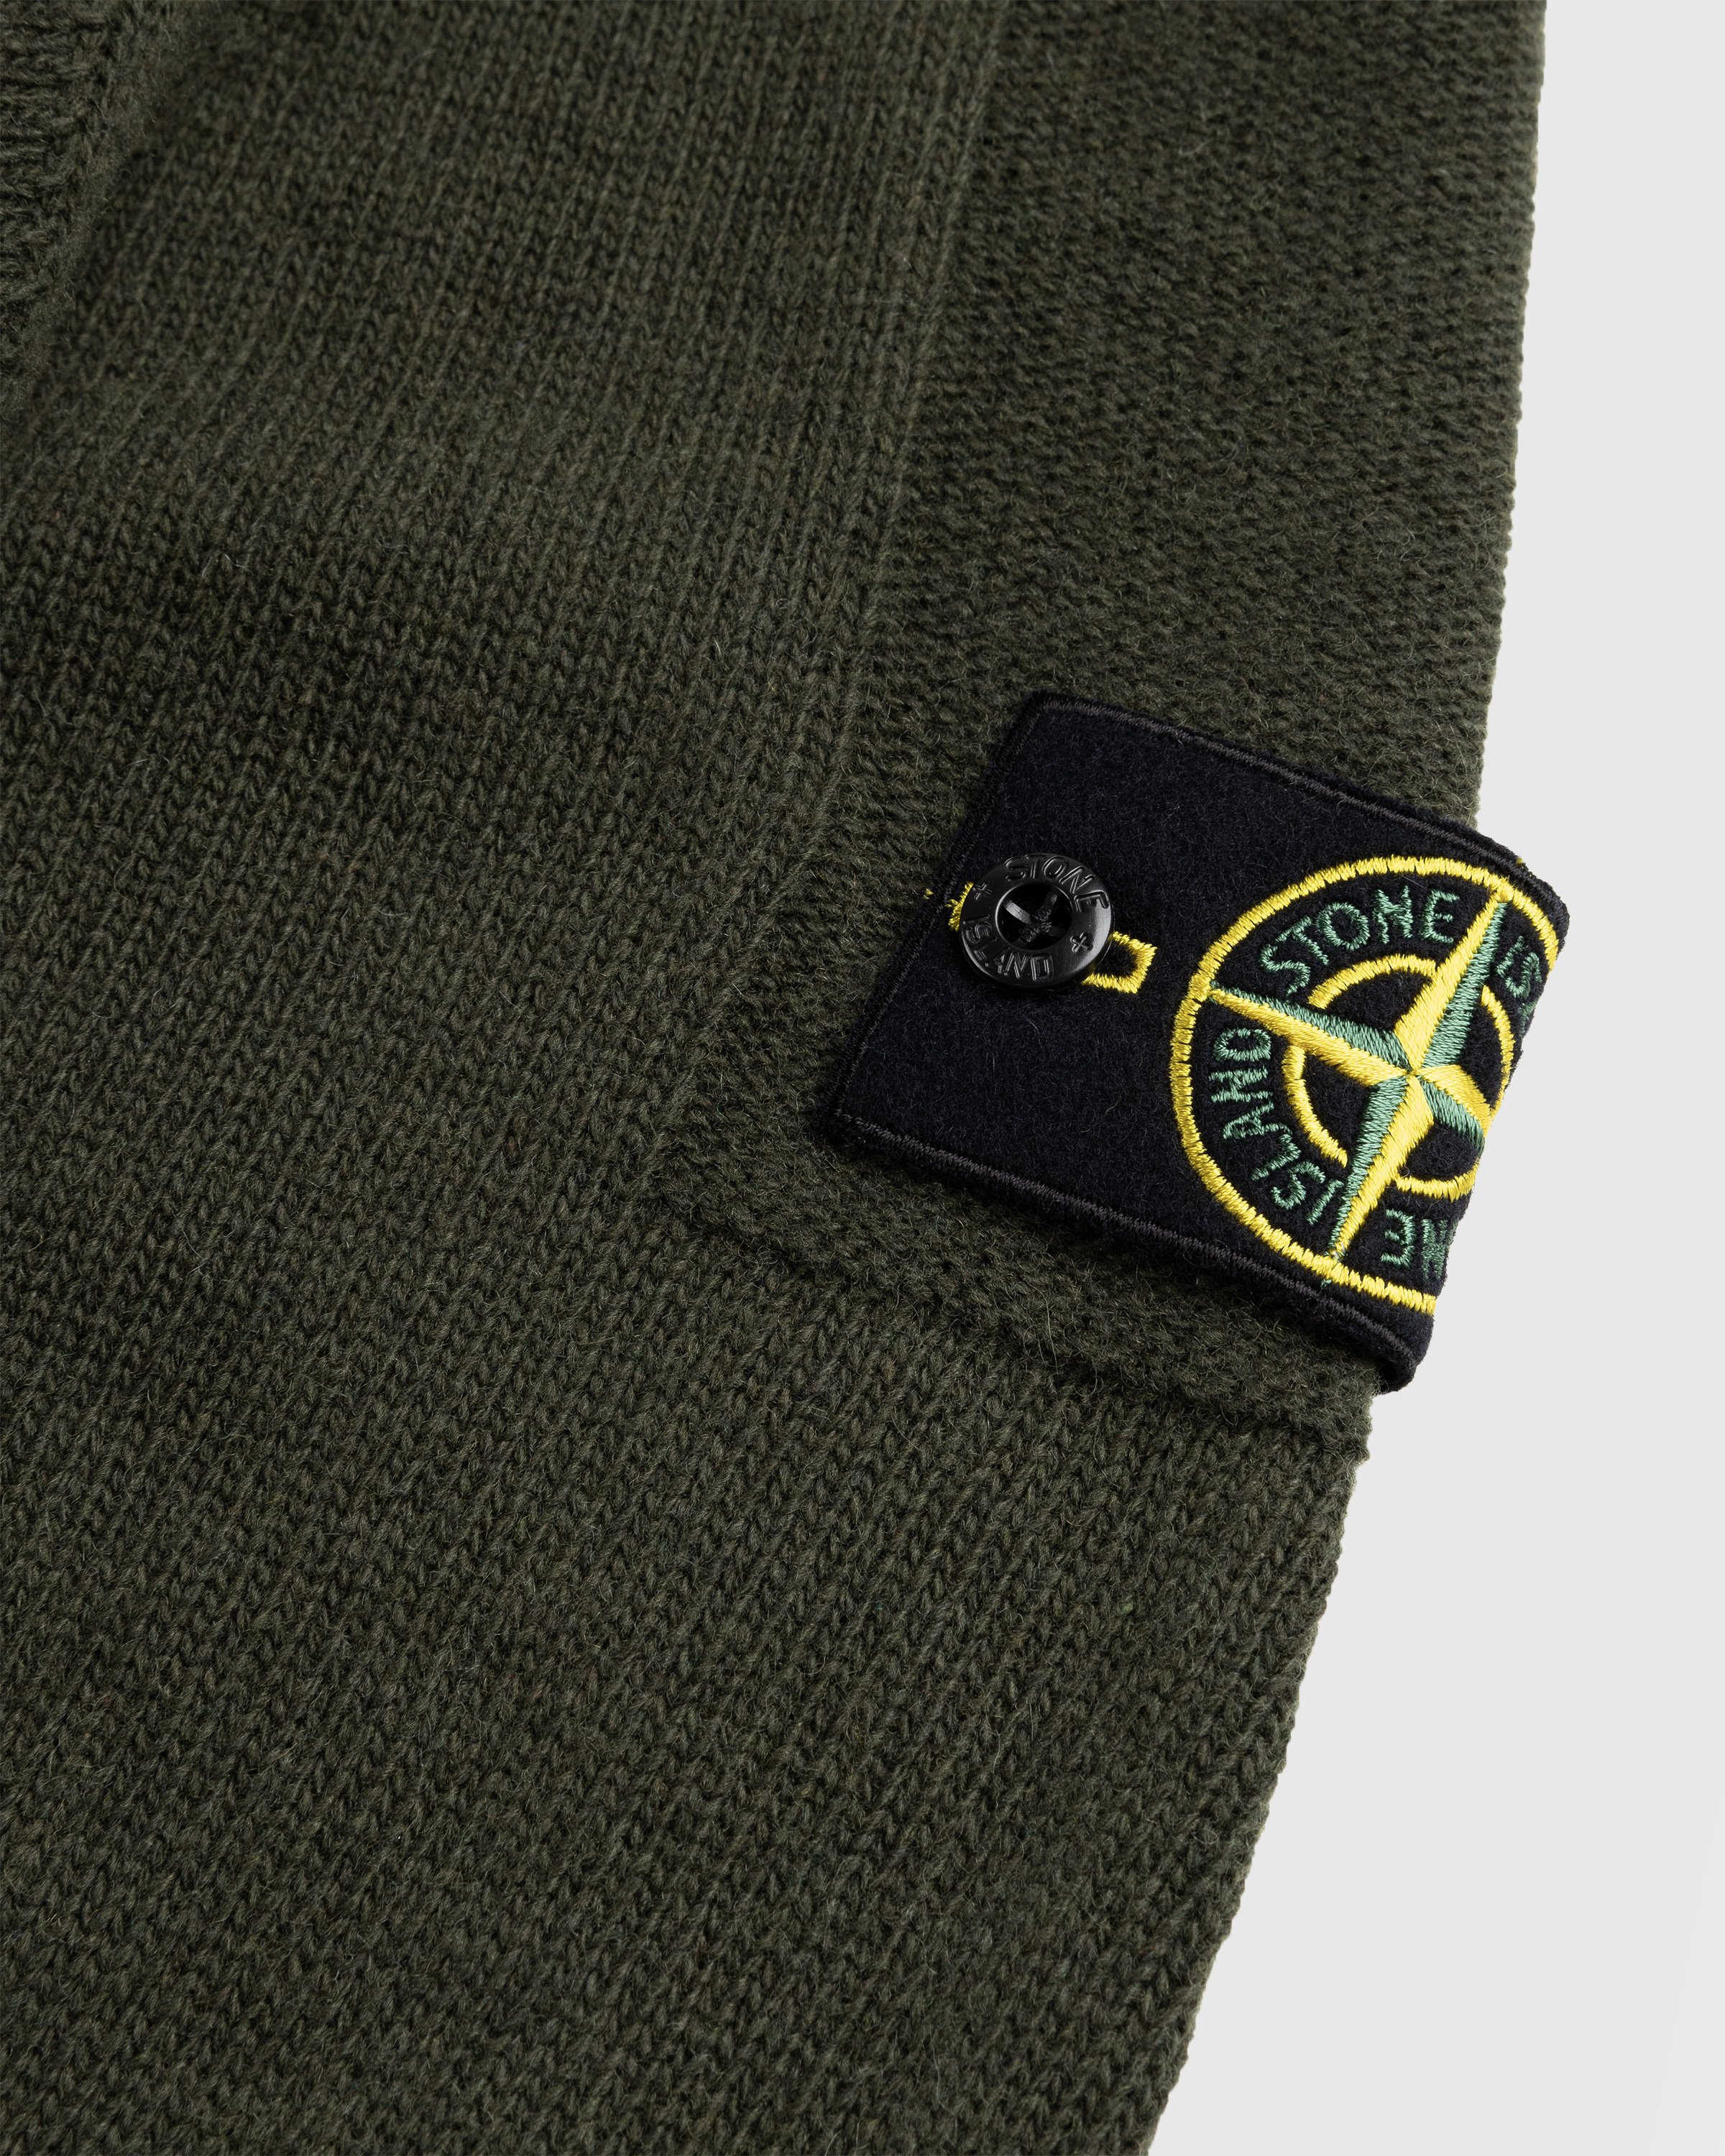 Stone Island - Lambswool Half-Zip Knit Olive - Clothing - Green - Image 6